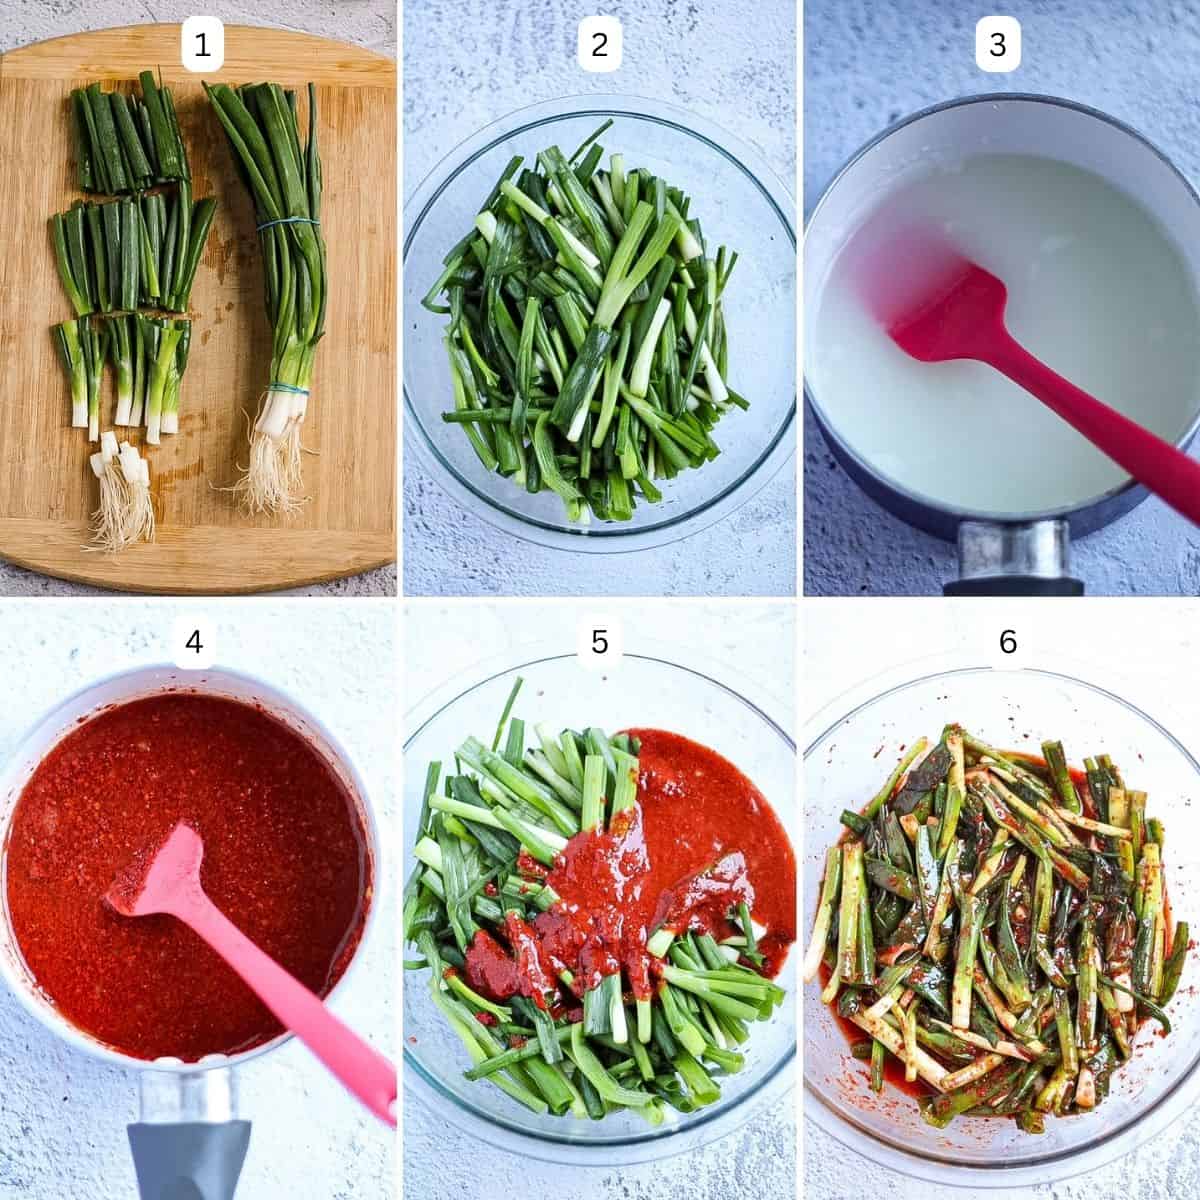 Step by step instructions on how to make green onion kimchi.